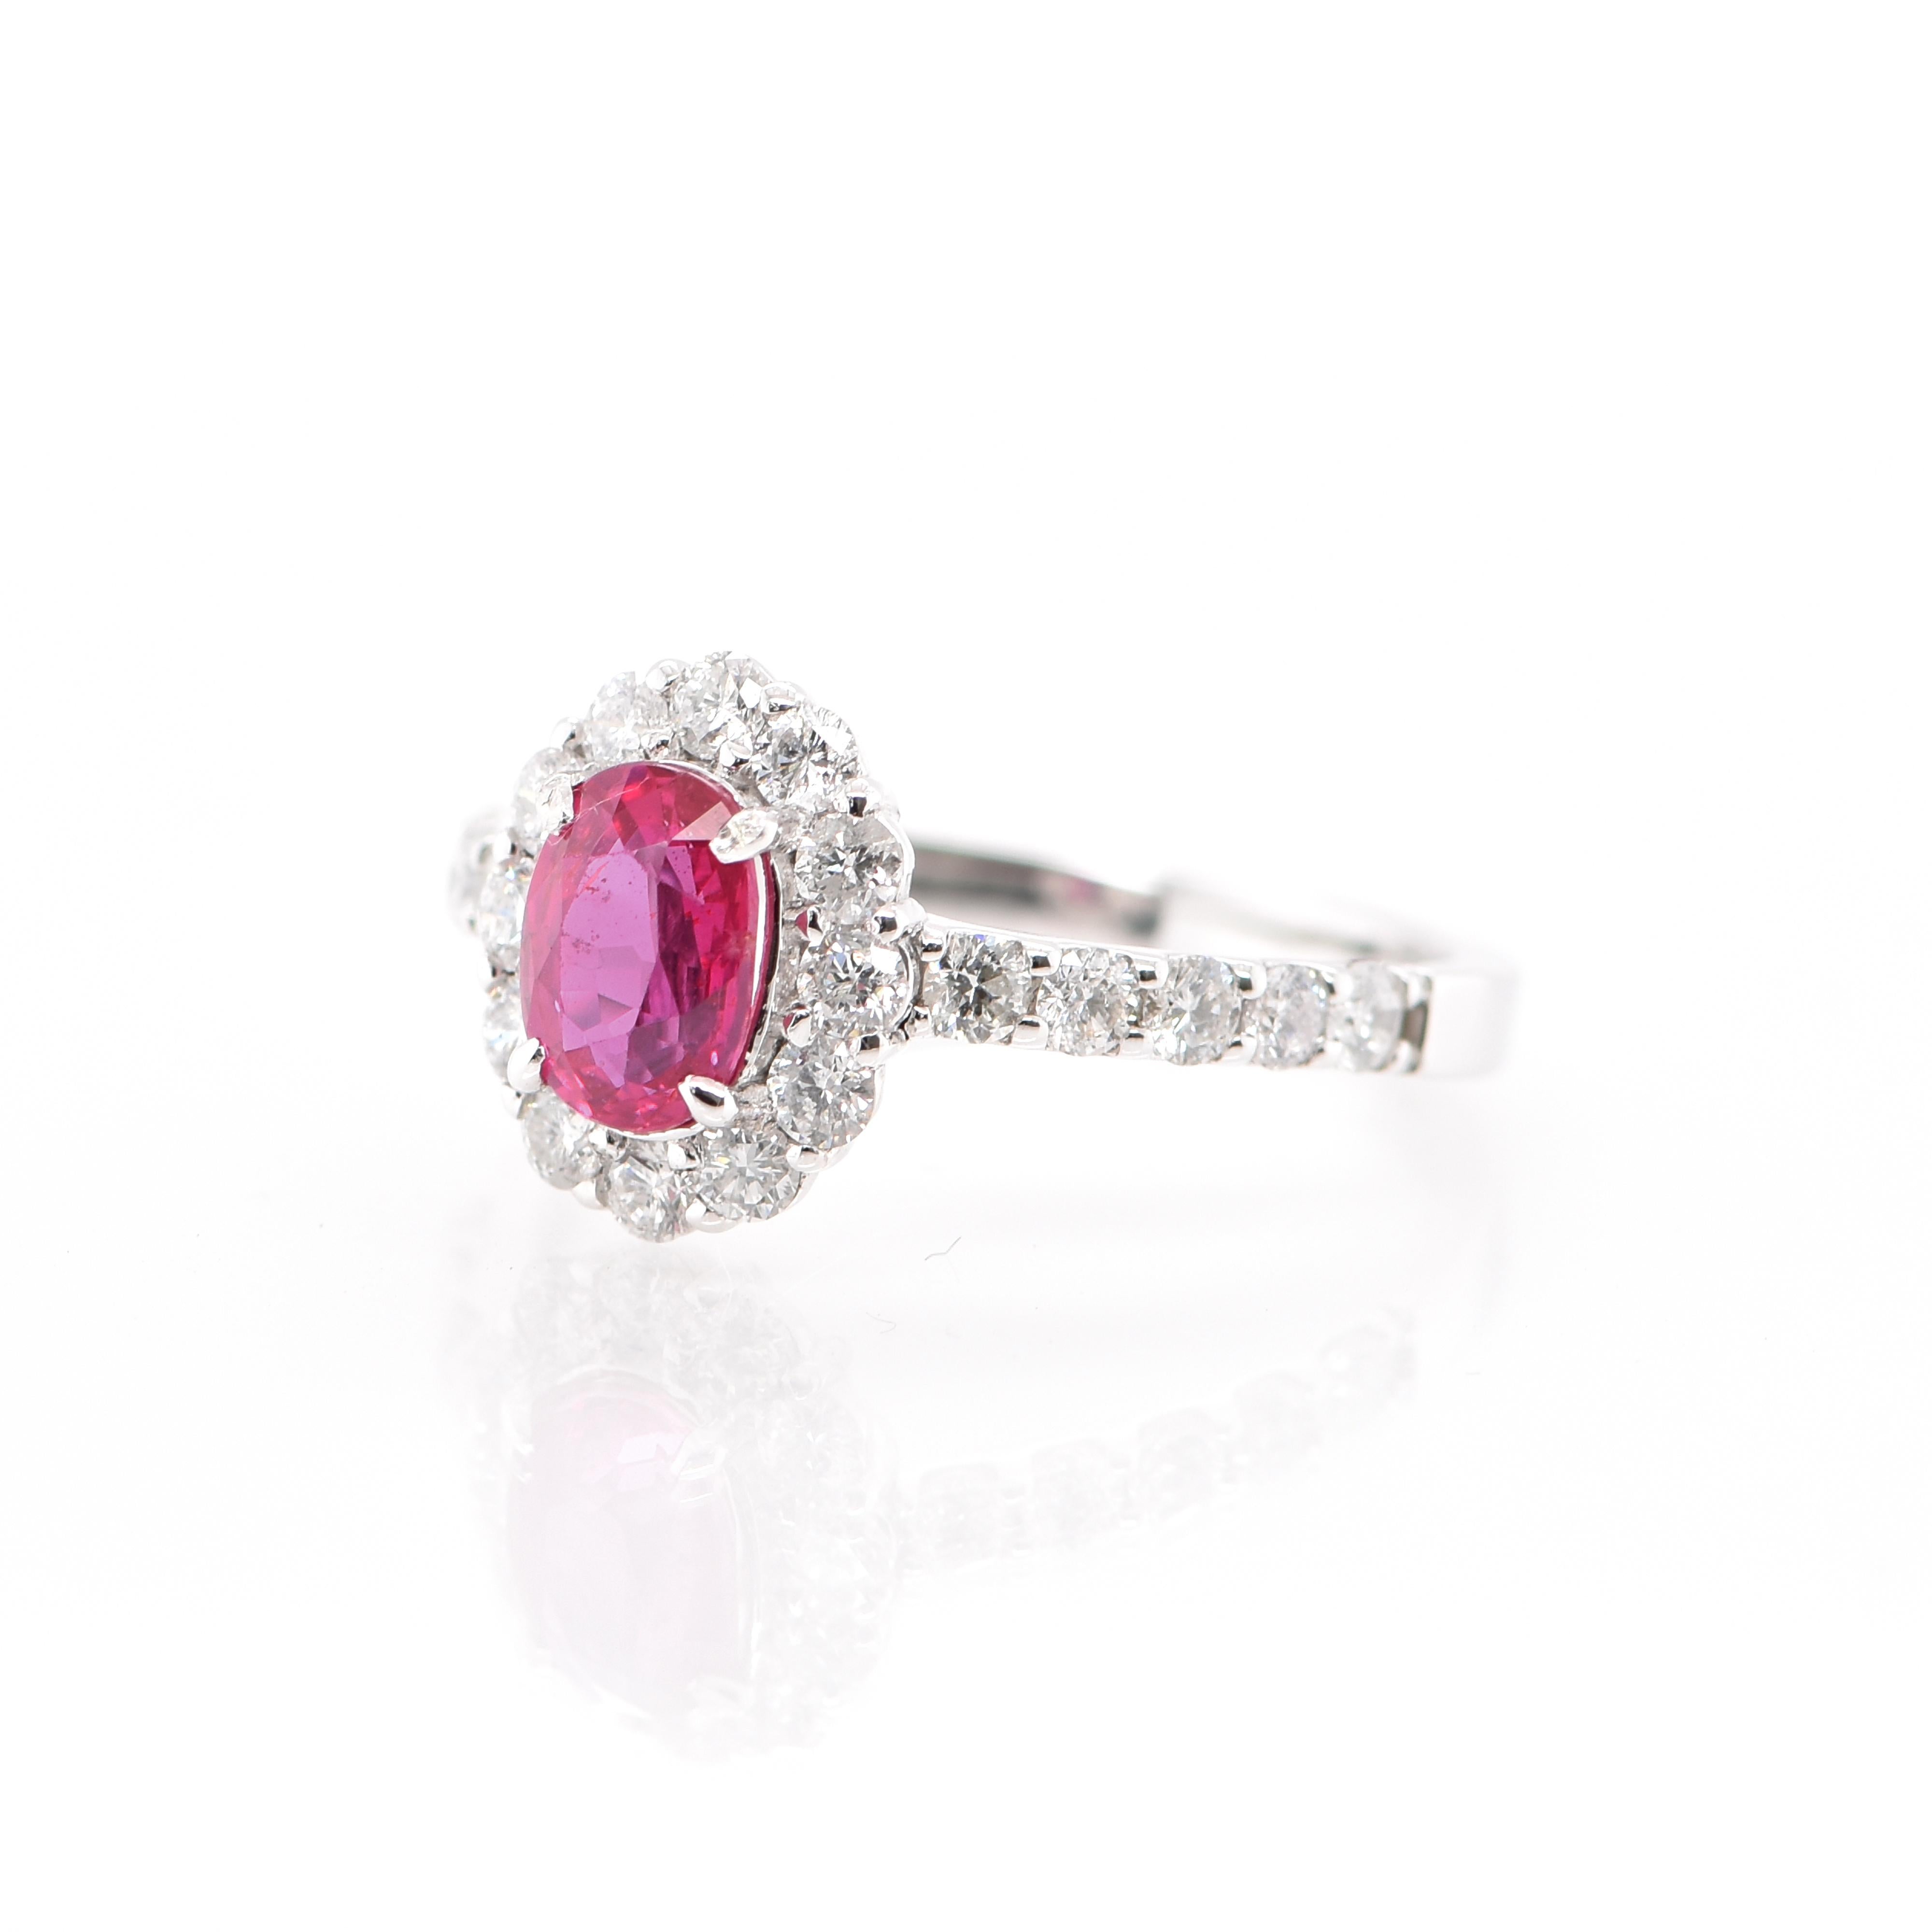 A beautiful Halo Engagement Ring featuring a 1.07 Carat No Heat (Untreated) Ruby and 0.77 Carats of Diamond Accents set in Platinum. Rubies are referred to as 